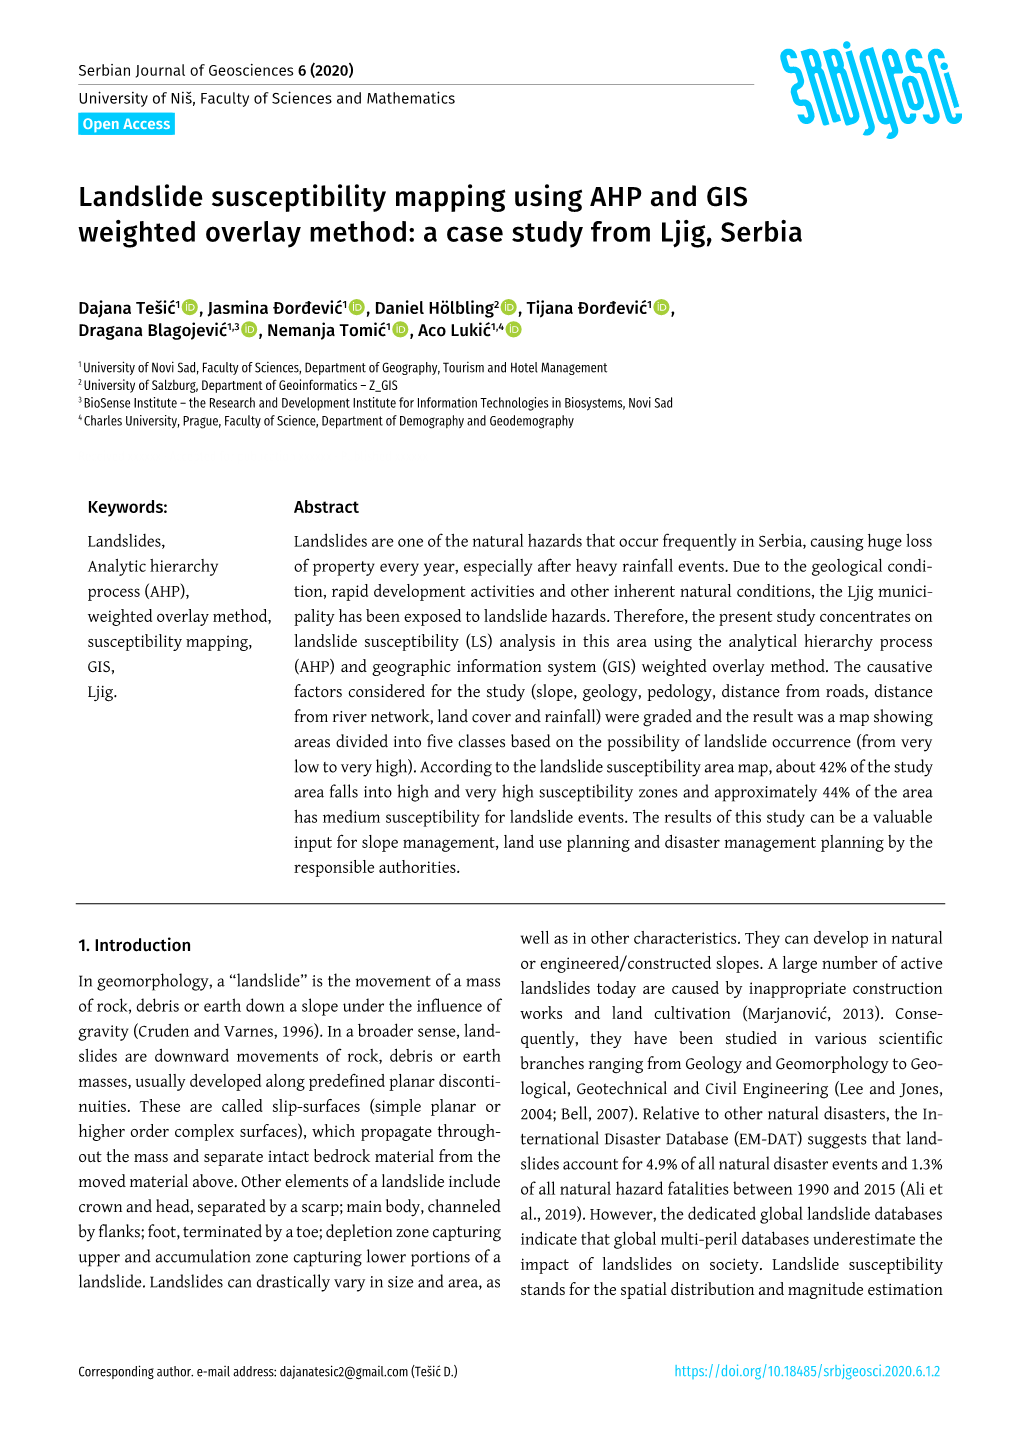 Landslide Susceptibility Mapping Using AHP and GIS Weighted Overlay Method: a Case Study from Ljig, Serbia